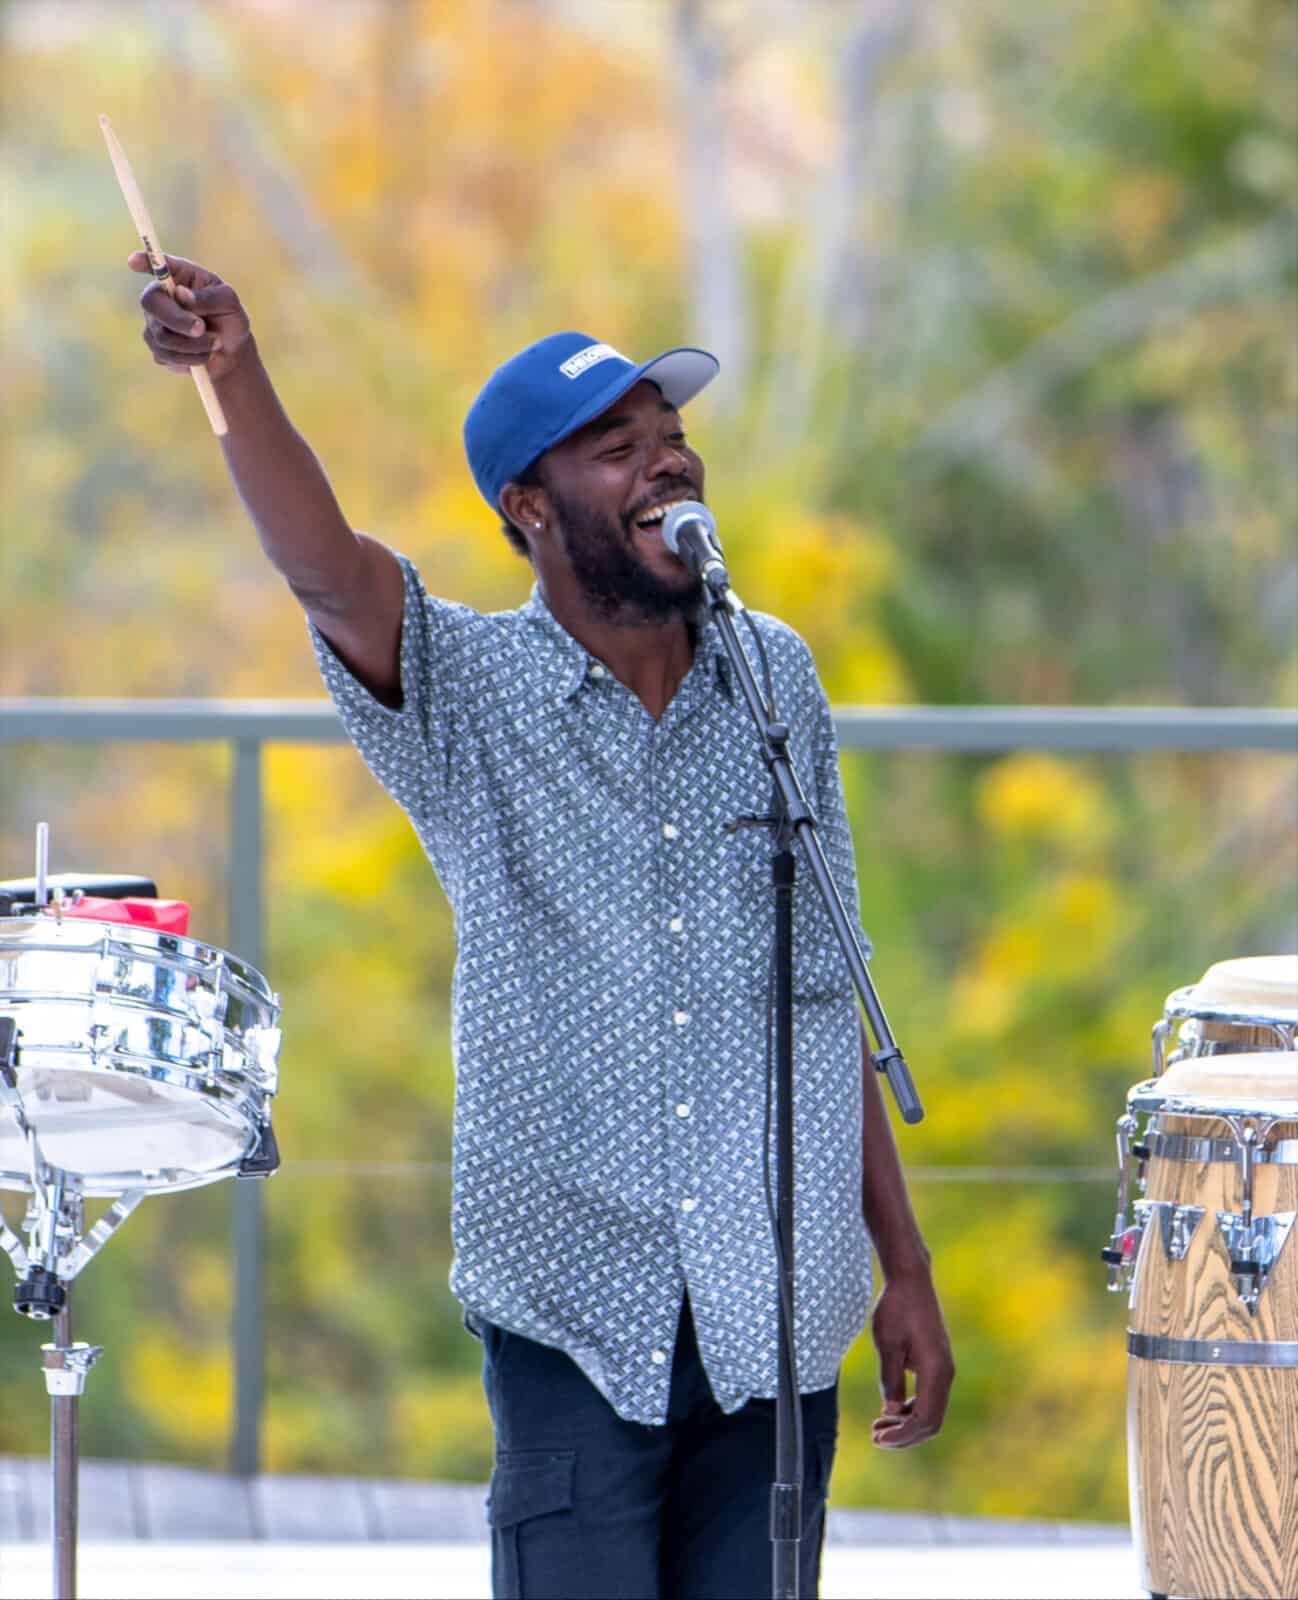 Internationally acclaimed percussionist Star Nii lifts a drumstick high and laughs as he performs at the BRIDGE gala. Press photo courtesy of BRIDGE